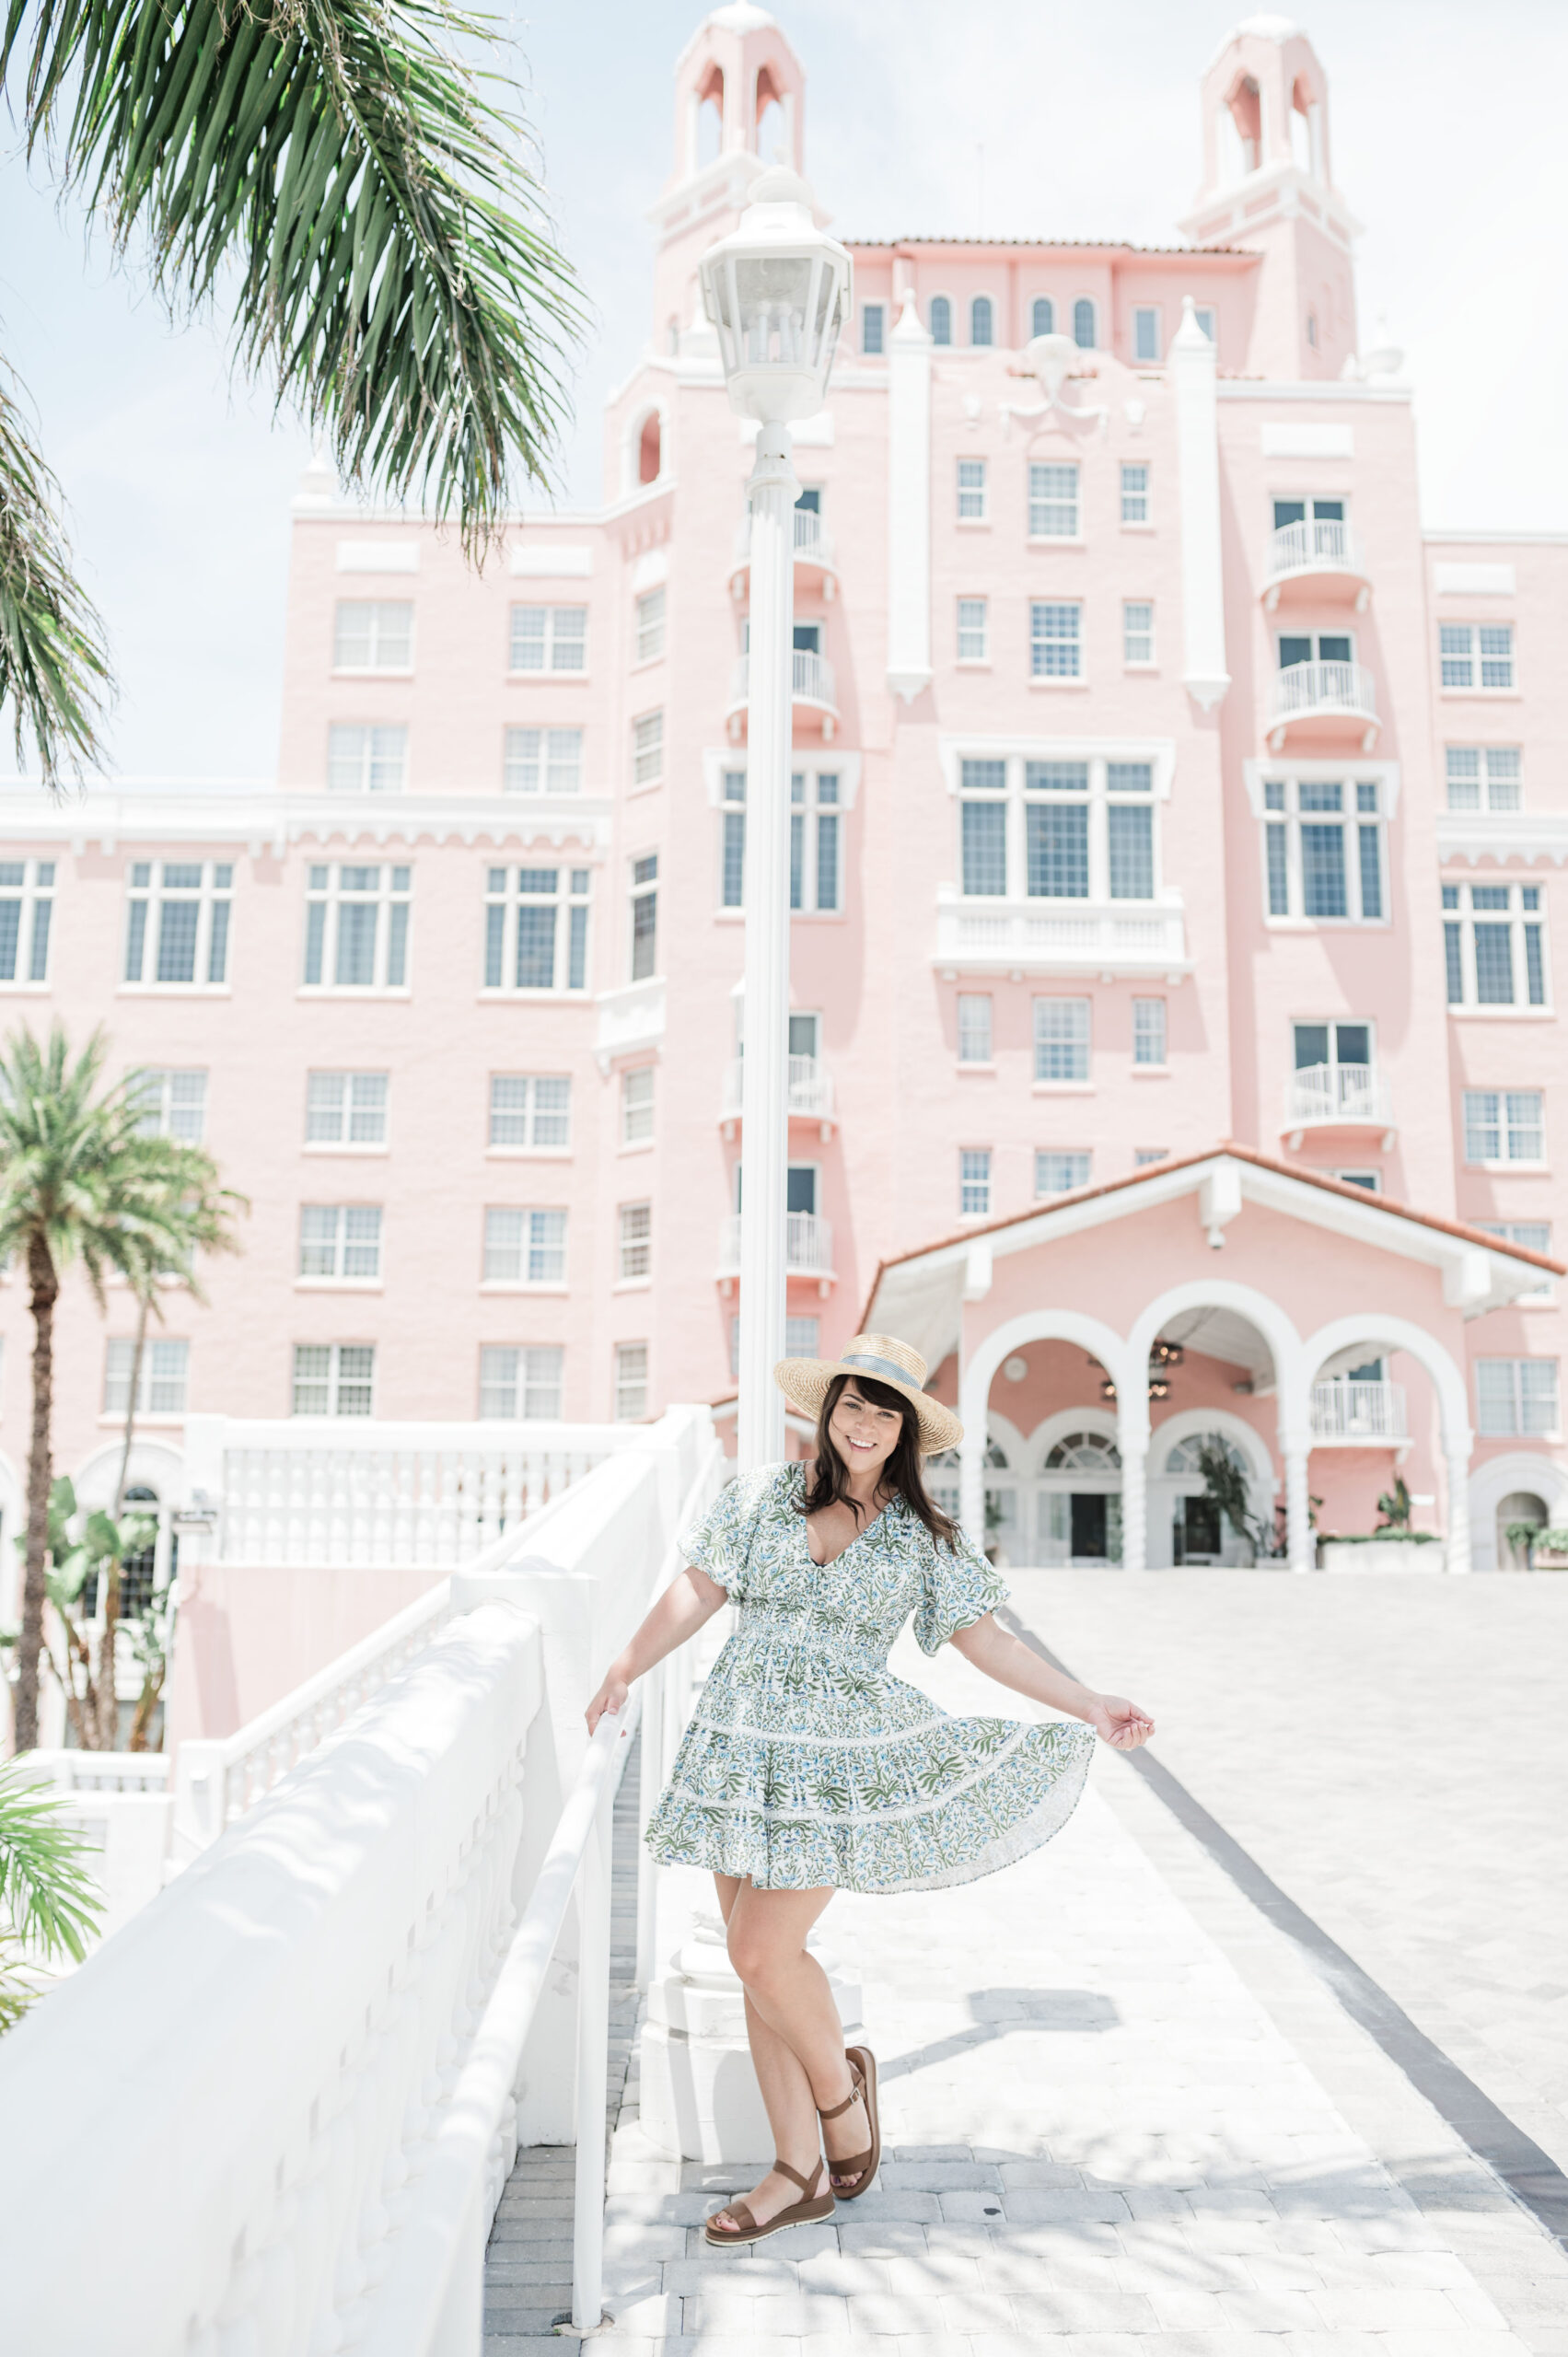 Brittney Naylor in front of The Don CeSar Pink Palace in Saint Pete Beach, Florida